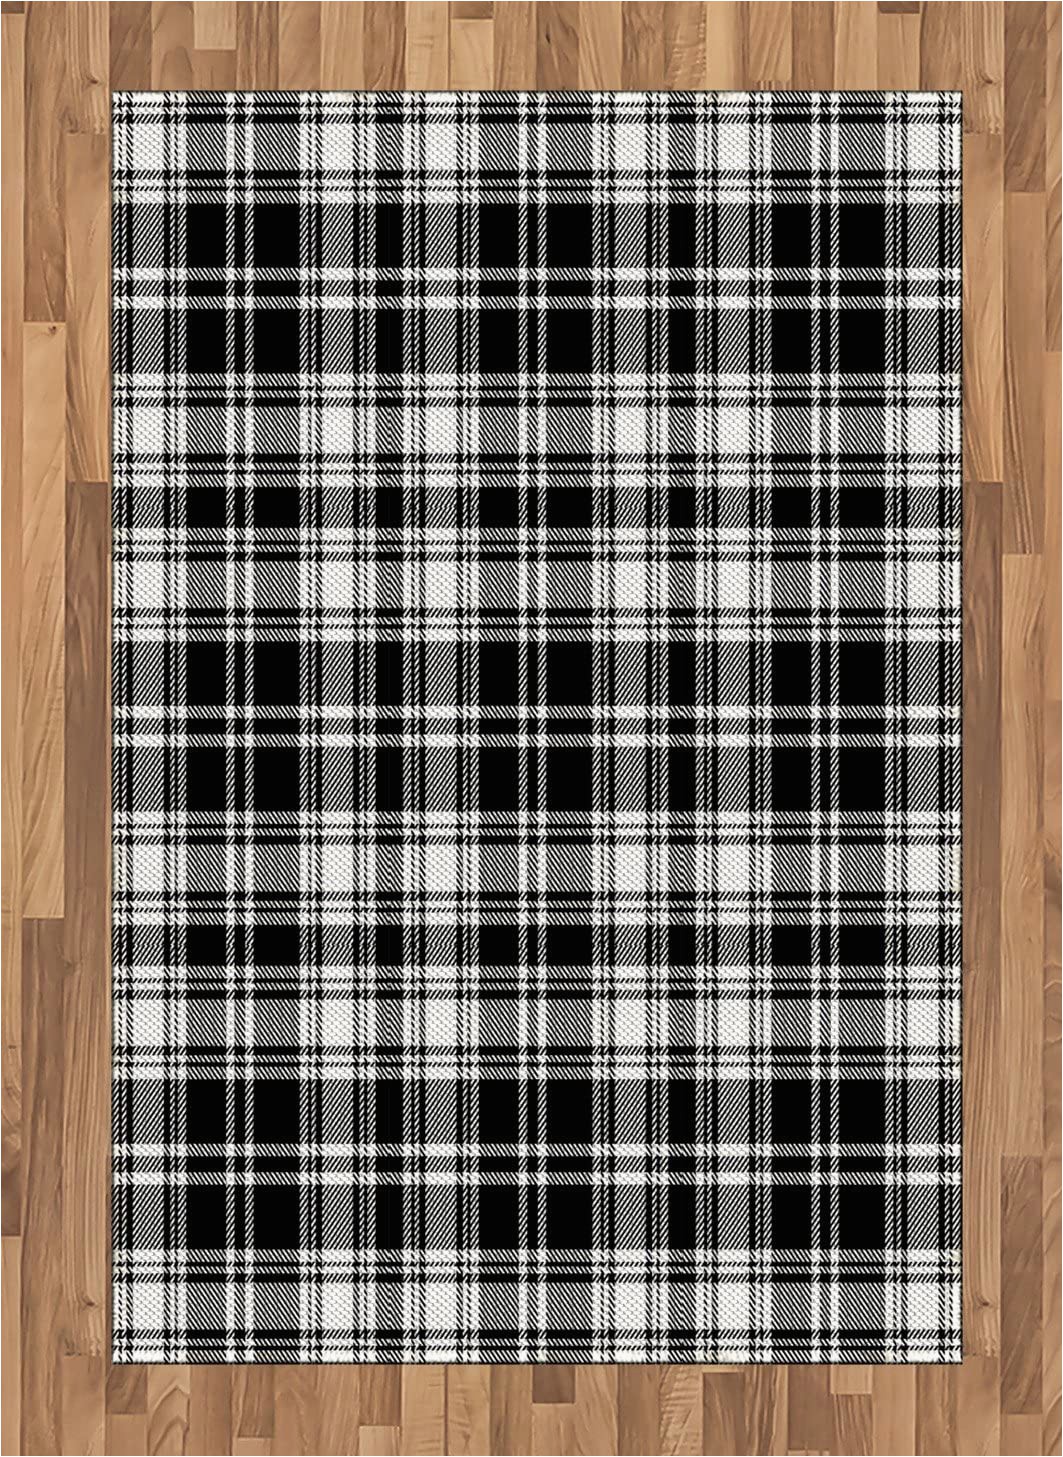 Plaid area Rug Living Room Lunarable Plaid area Rug Monochrome Style Vintage English Stripes and Checks Pattern Abstract Grunge Look Flat Woven Accent Rug for Living Room